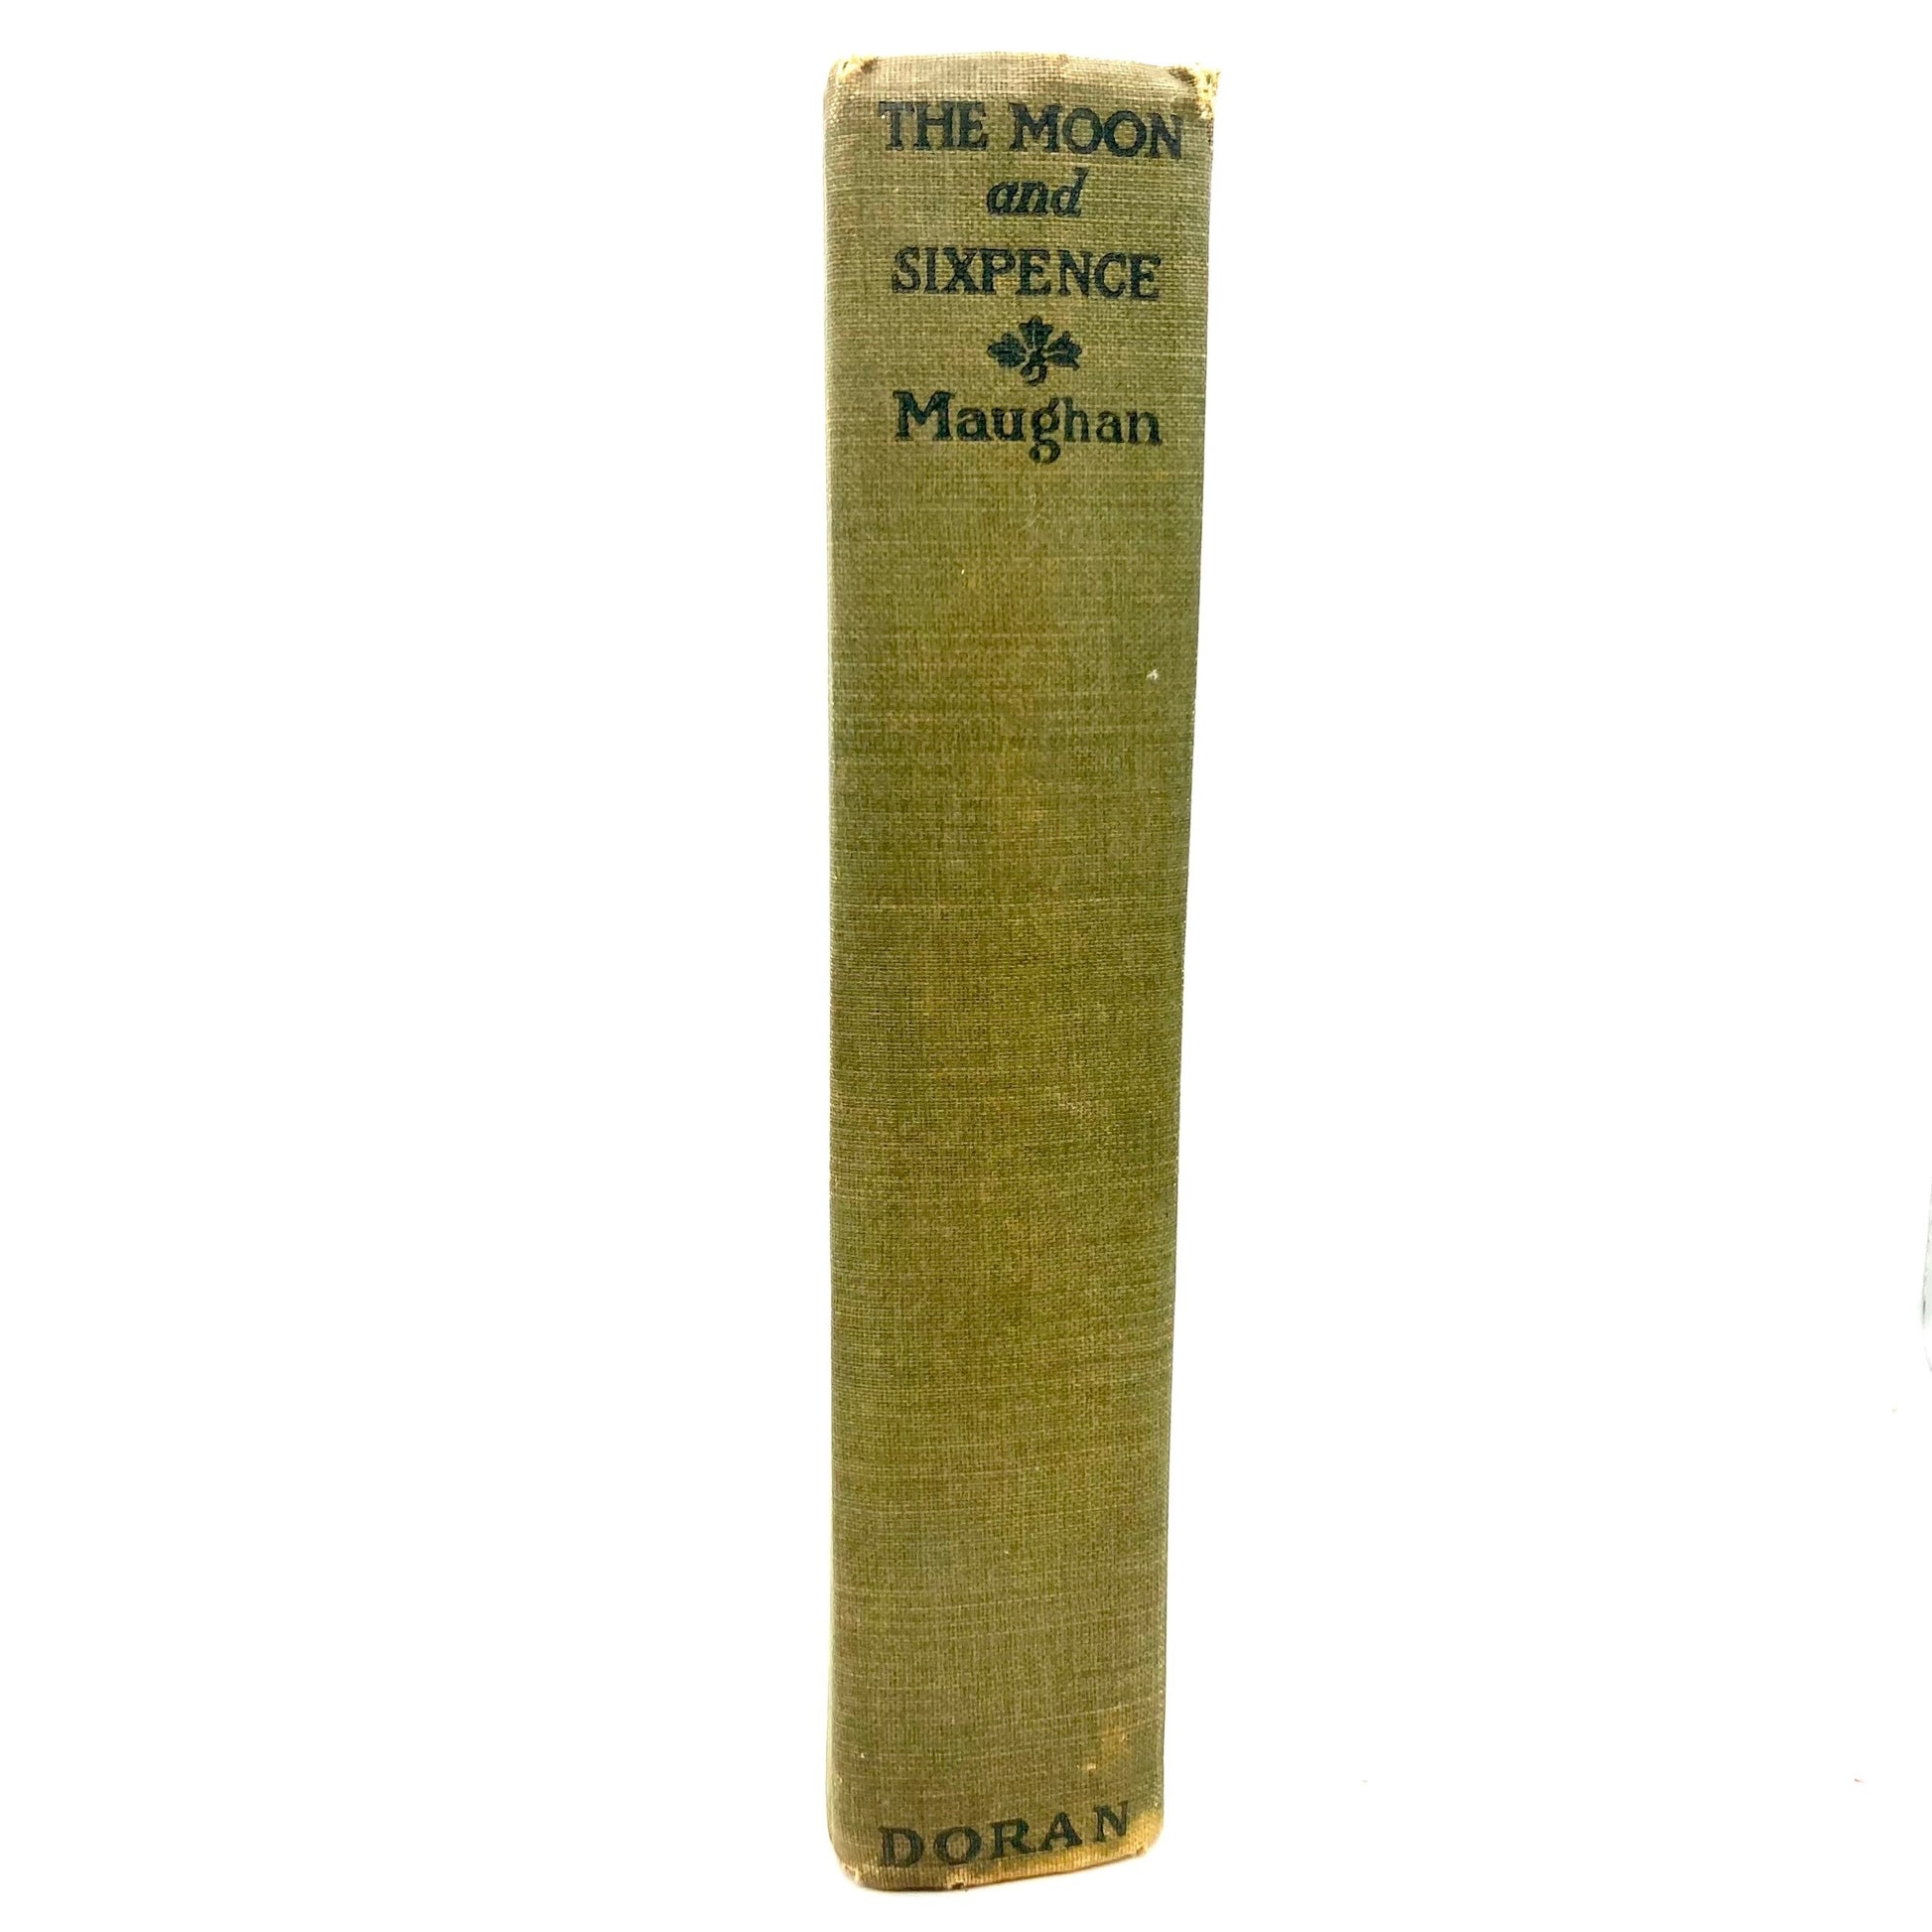 MAUGHAM, W. Somerset "The Moon and Sixpence" [George H. Doran, 1919] 1st Edition - Buzz Bookstore